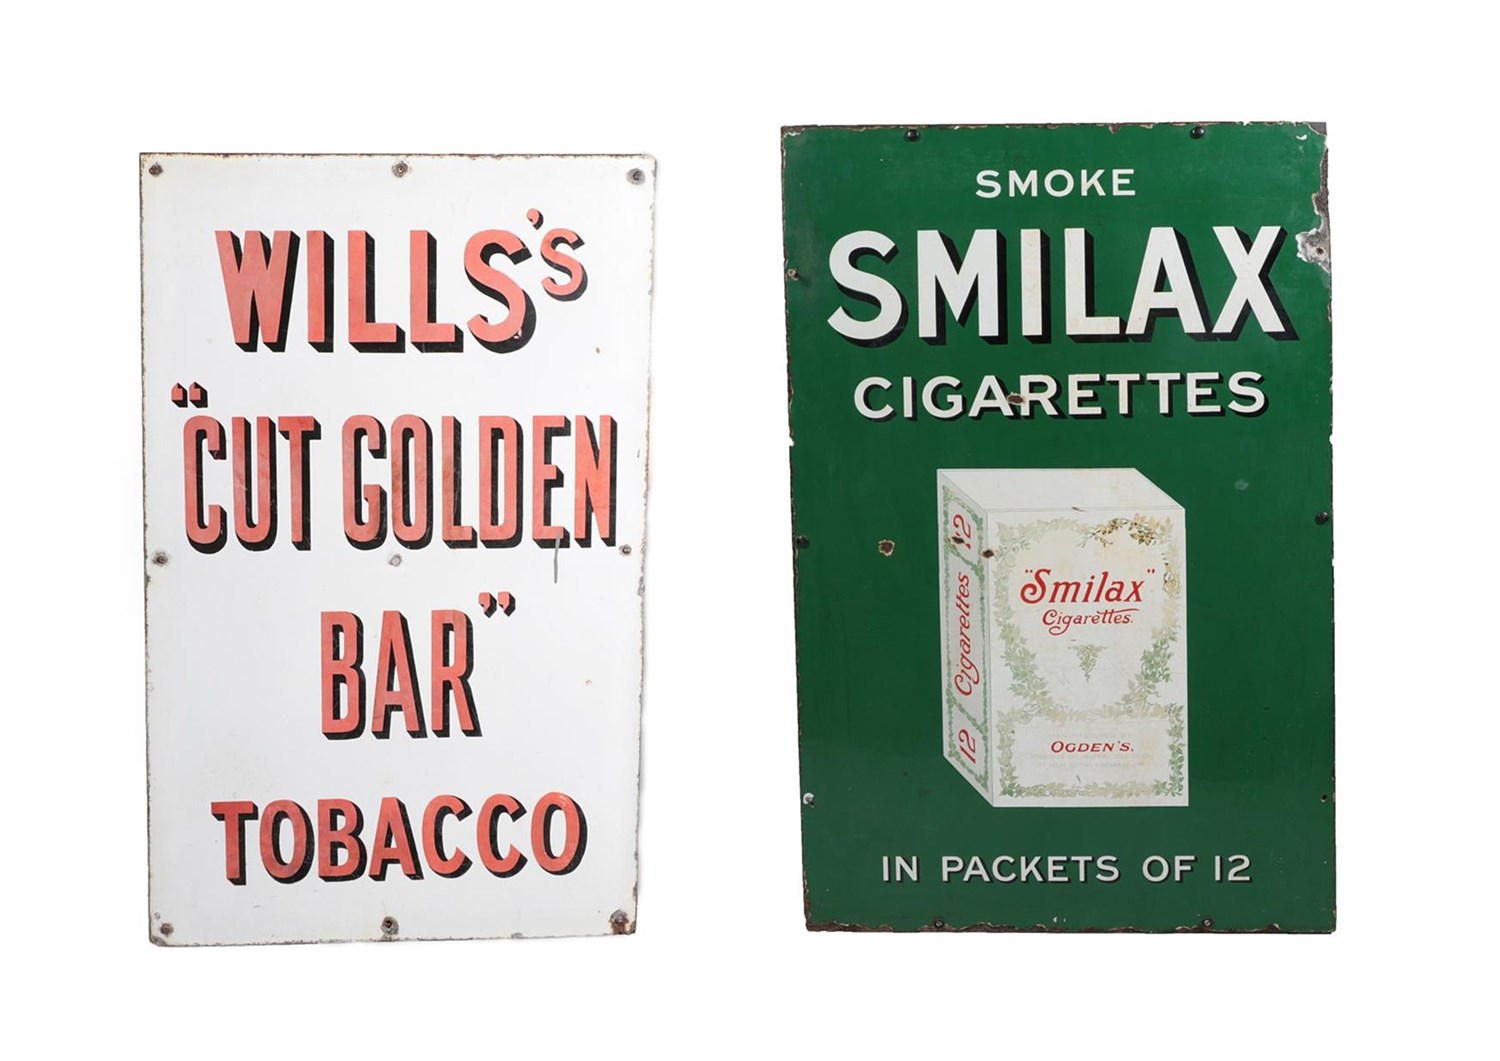 Lot 240 - A Smilax Cigarettes Enamel Advertising Sign, inscribed SMOKE SMILAX CIGARETTES IN PACKETS OF 12 and